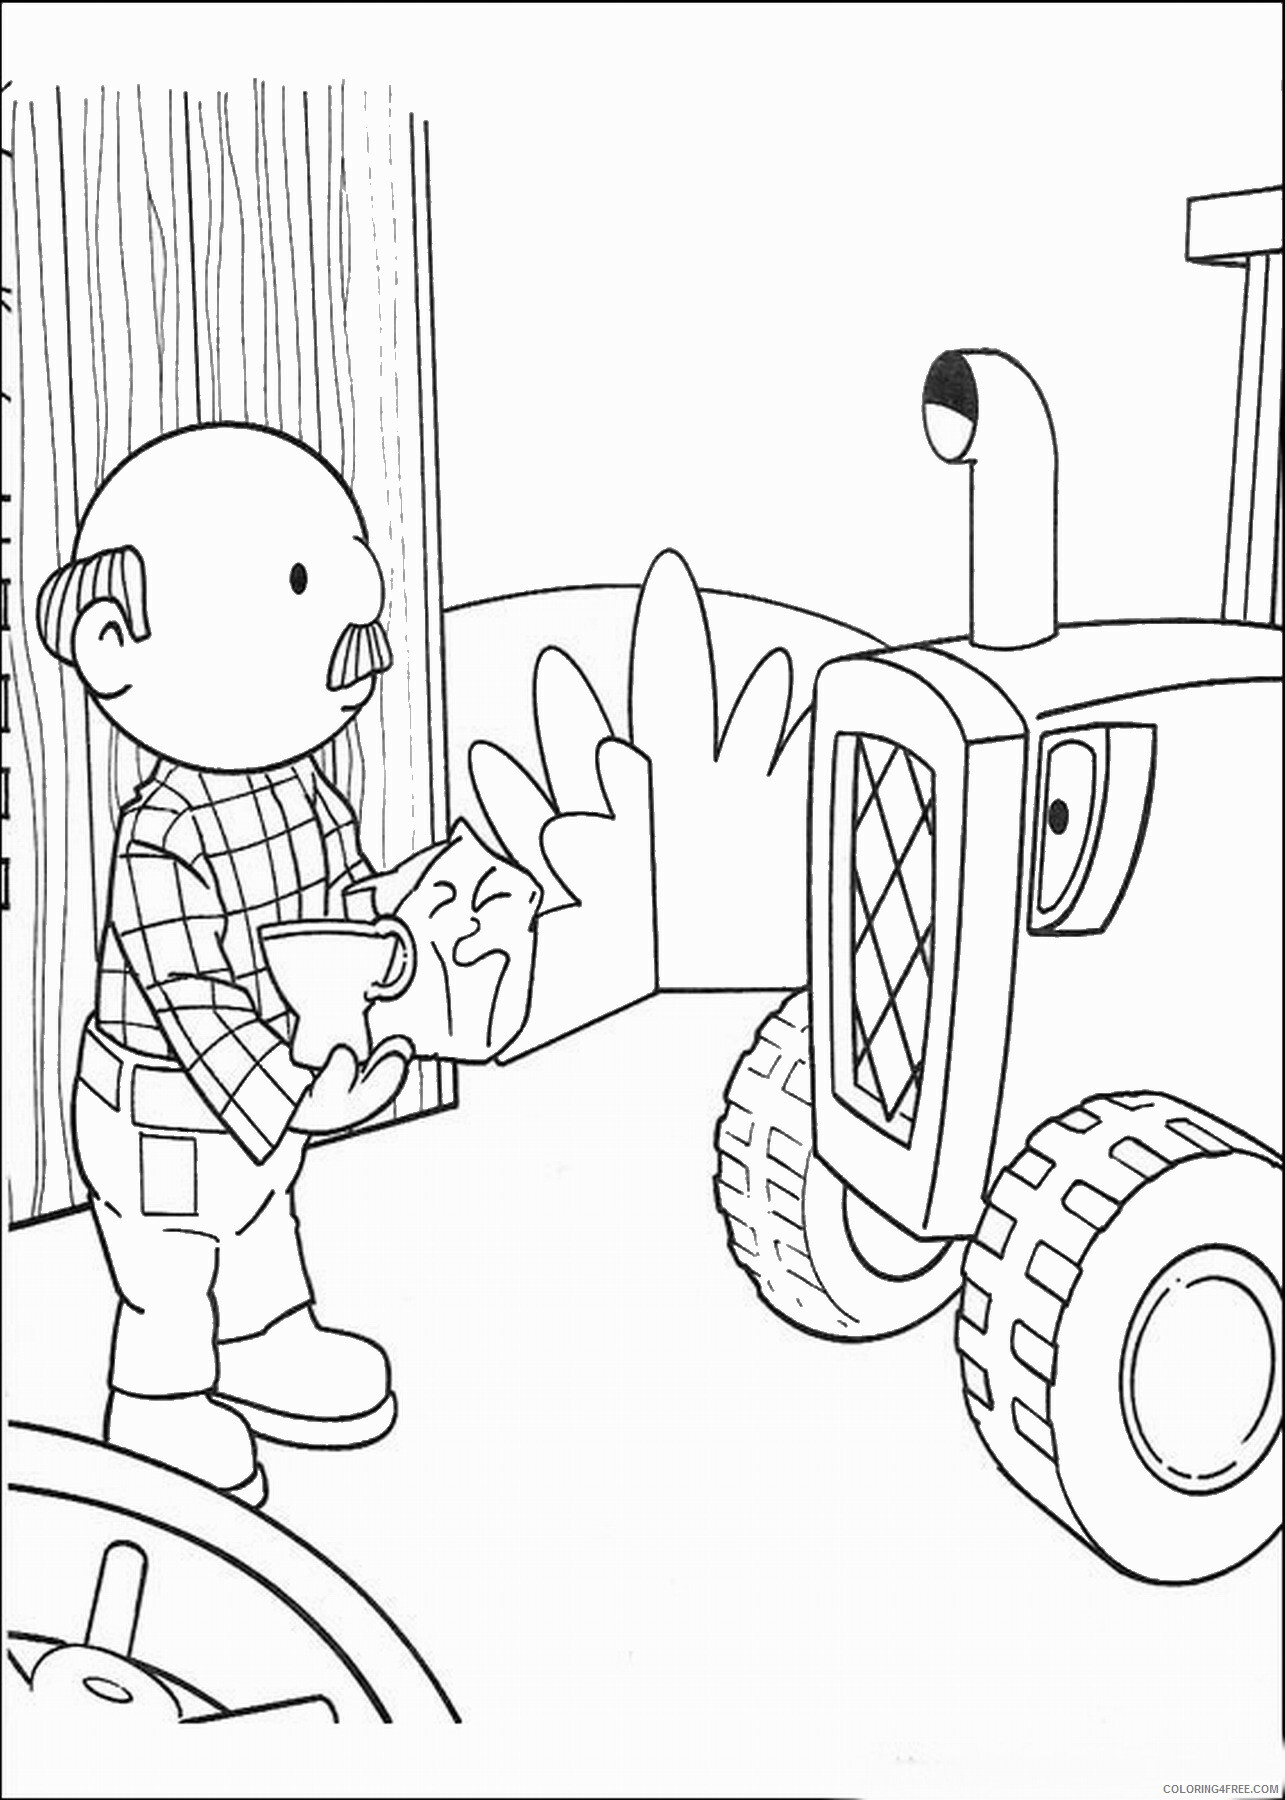 Bob the Builder Coloring Pages TV Film bob the builder_19 Printable 2020 00969 Coloring4free